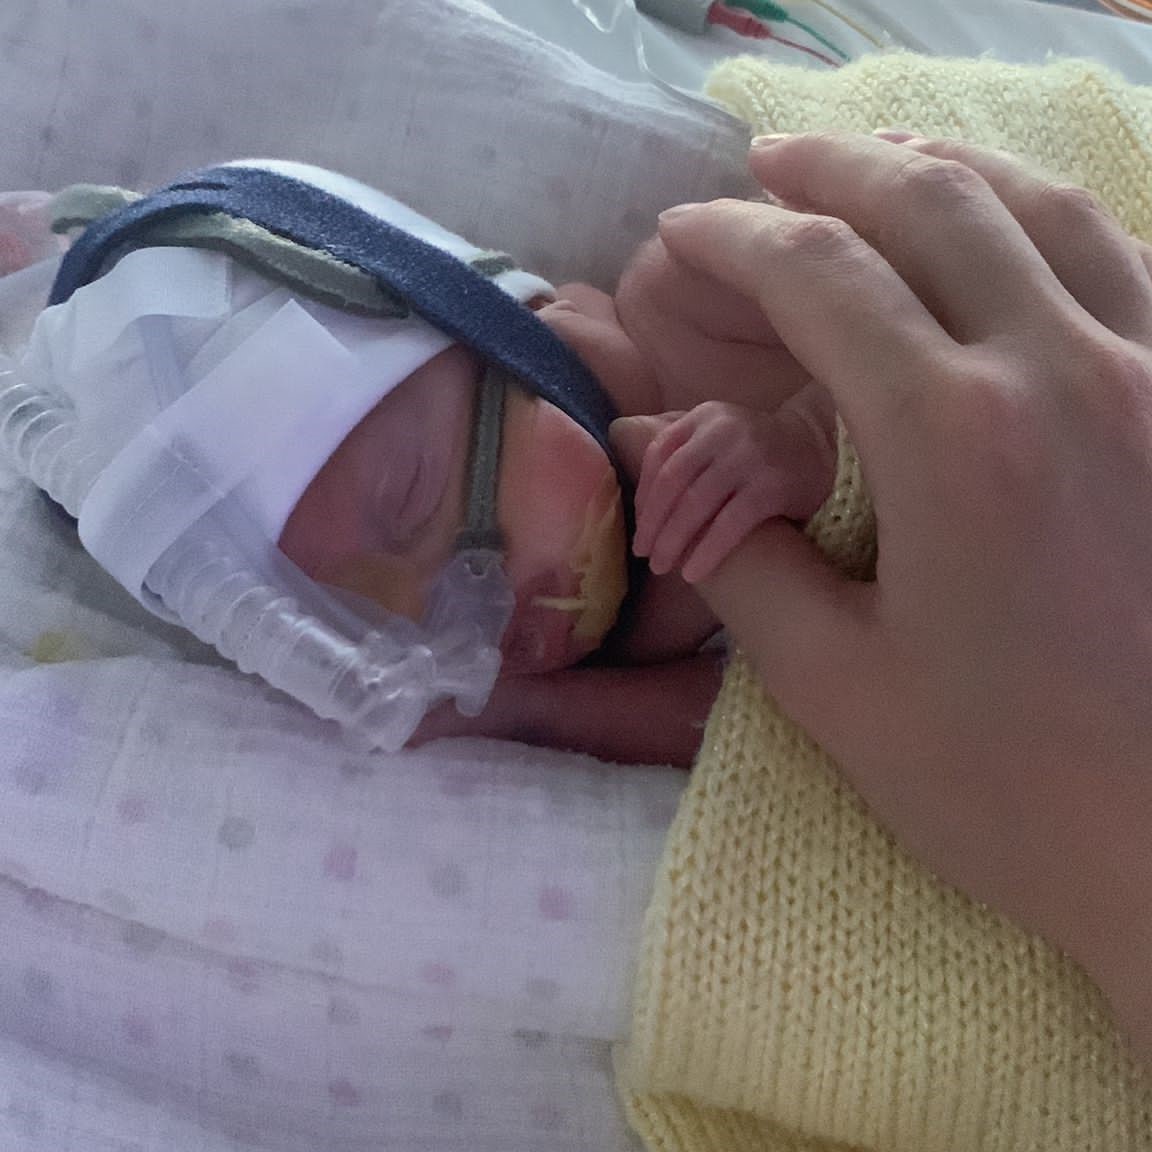 A premature baby in NICU. She has breathing support and tubes and is holding her father's hand as she sleeps